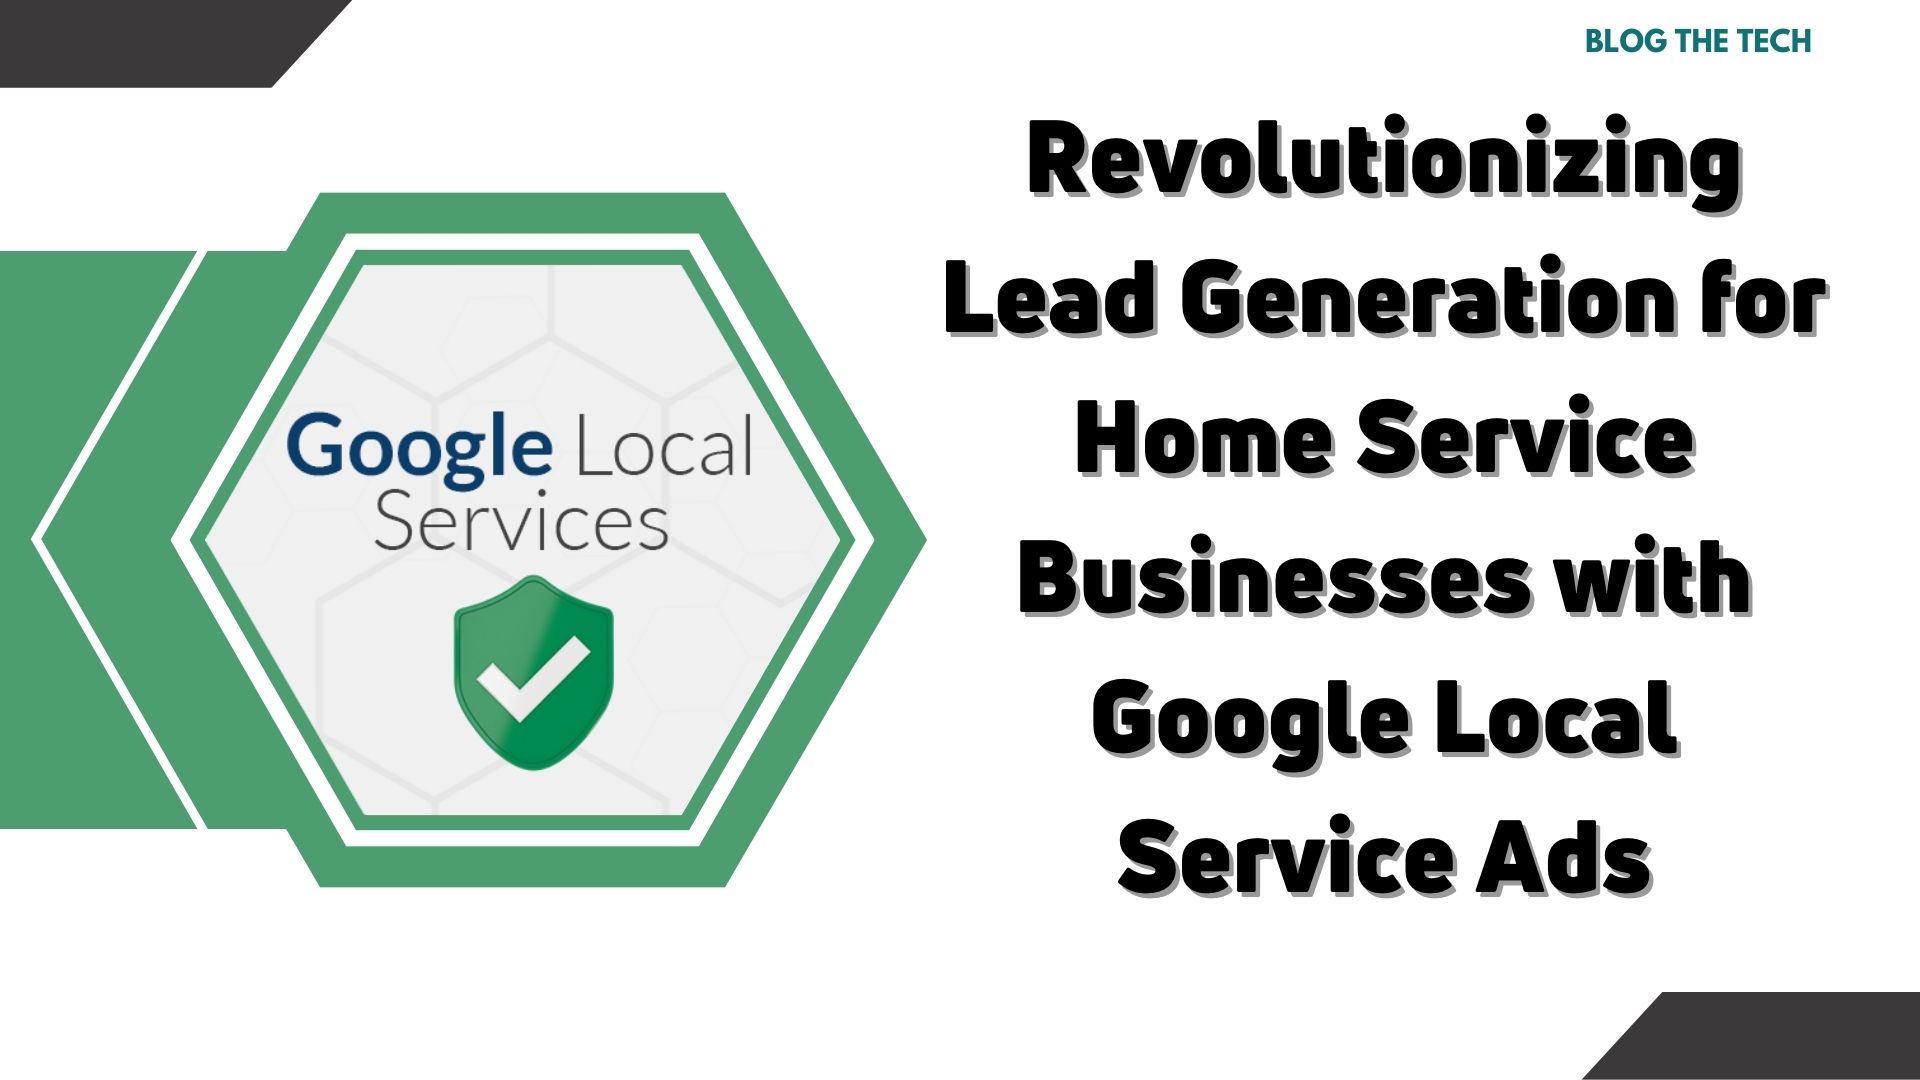 Revolutionizing Lead Generation for Home Service Businesses with Google Local Service Ads